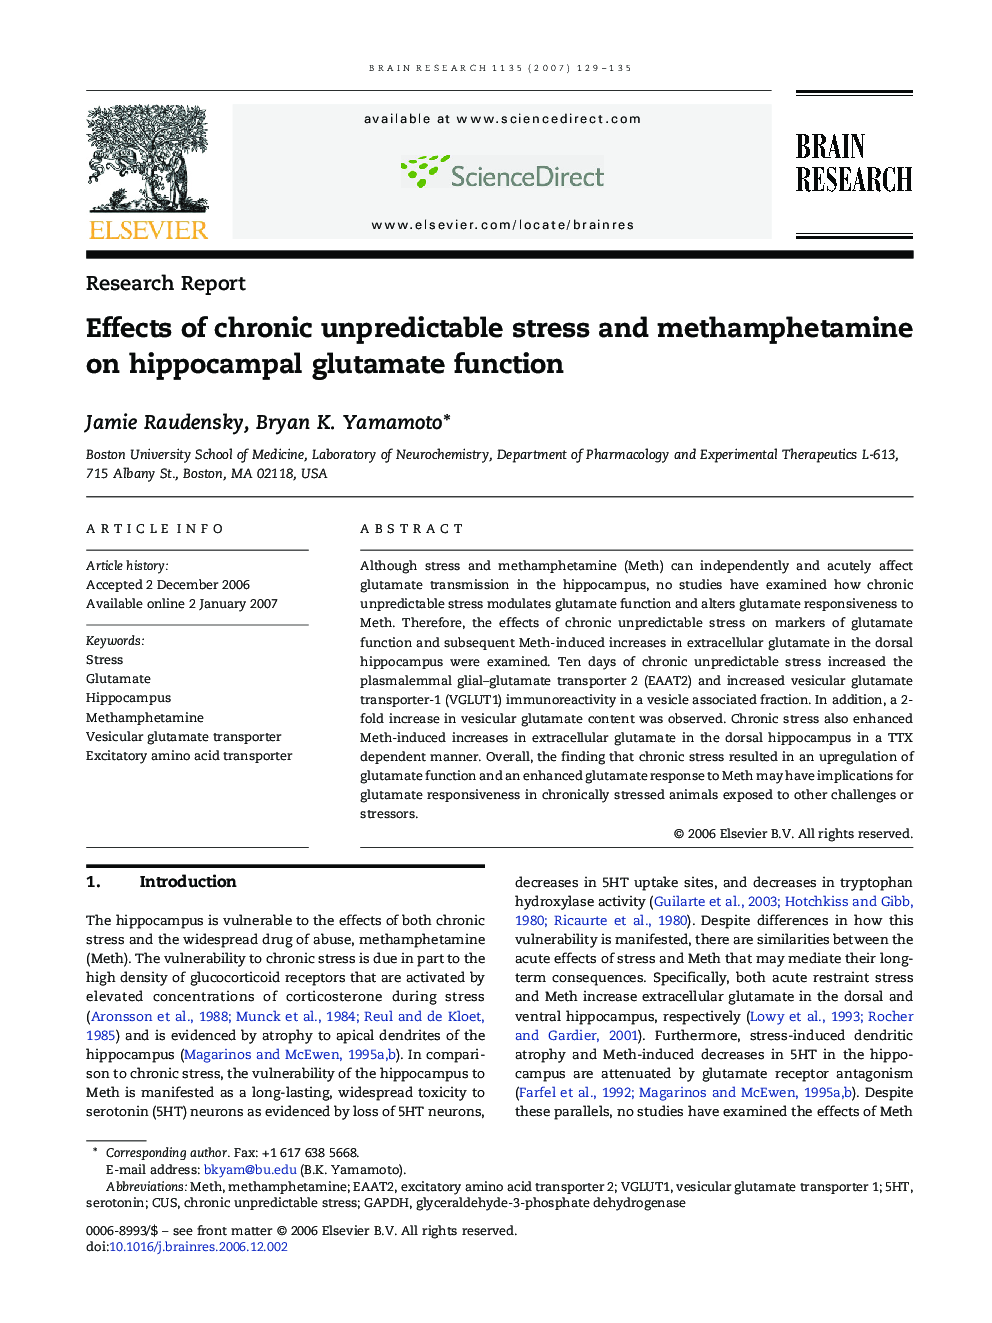 Research ReportEffects of chronic unpredictable stress and methamphetamine on hippocampal glutamate function